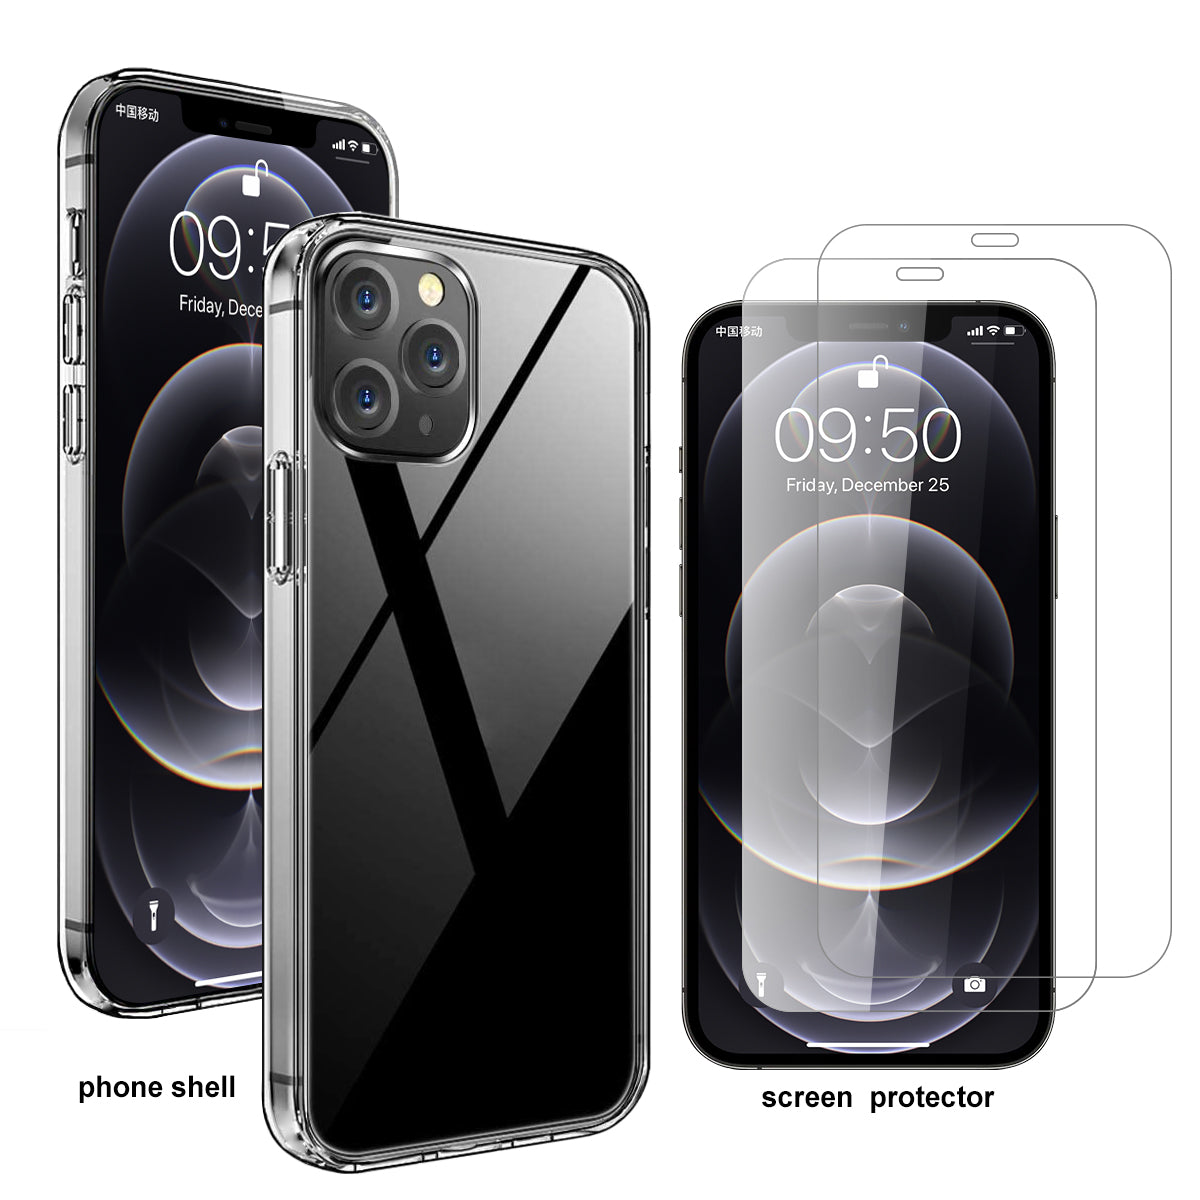 iPhone 11 Clear Strong TPU Case and 2 Tempered Glass Screen Protectors